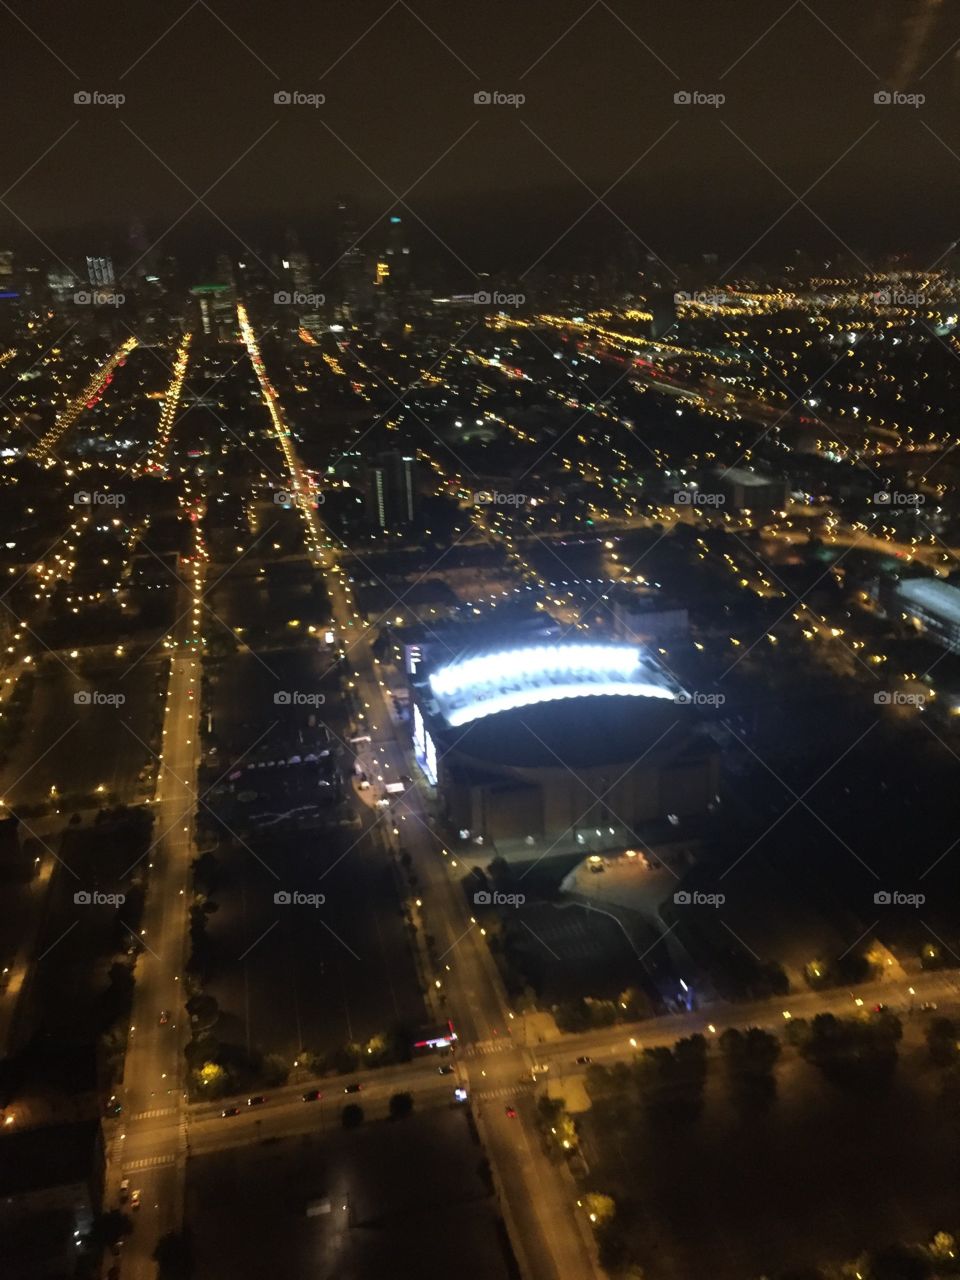 Home of the Chicago Black Hawks by air.